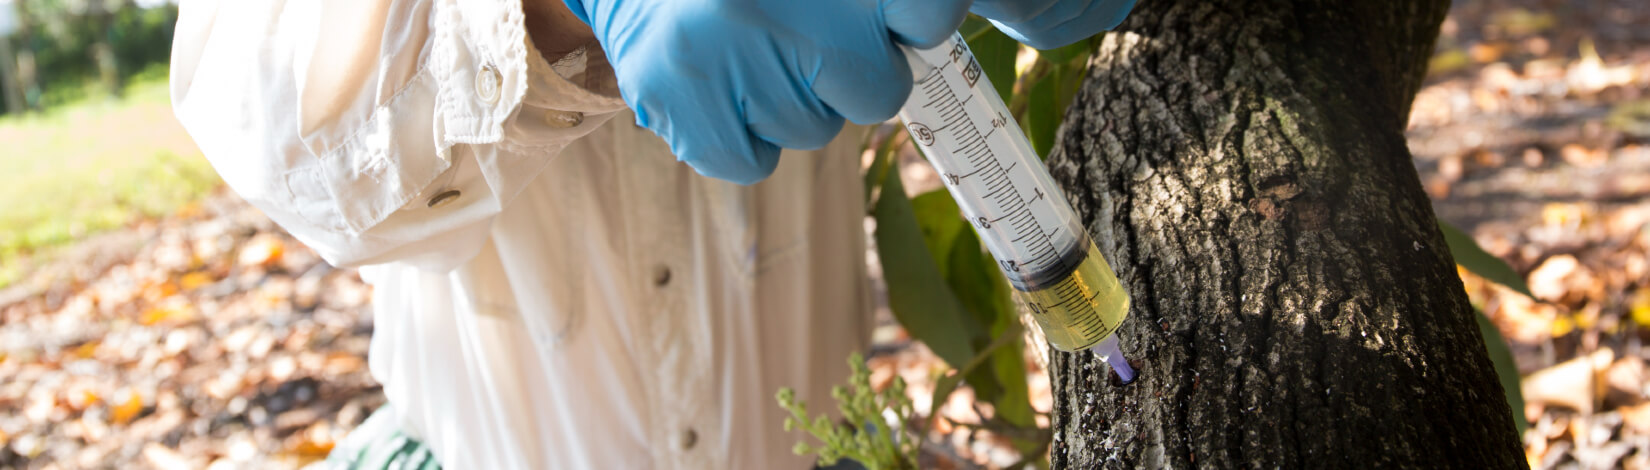 Dr. Jonathan Crane injects a chemical treatment to research Laurel Wilt resistance in avocado trees at the Tropical Research and Education Center